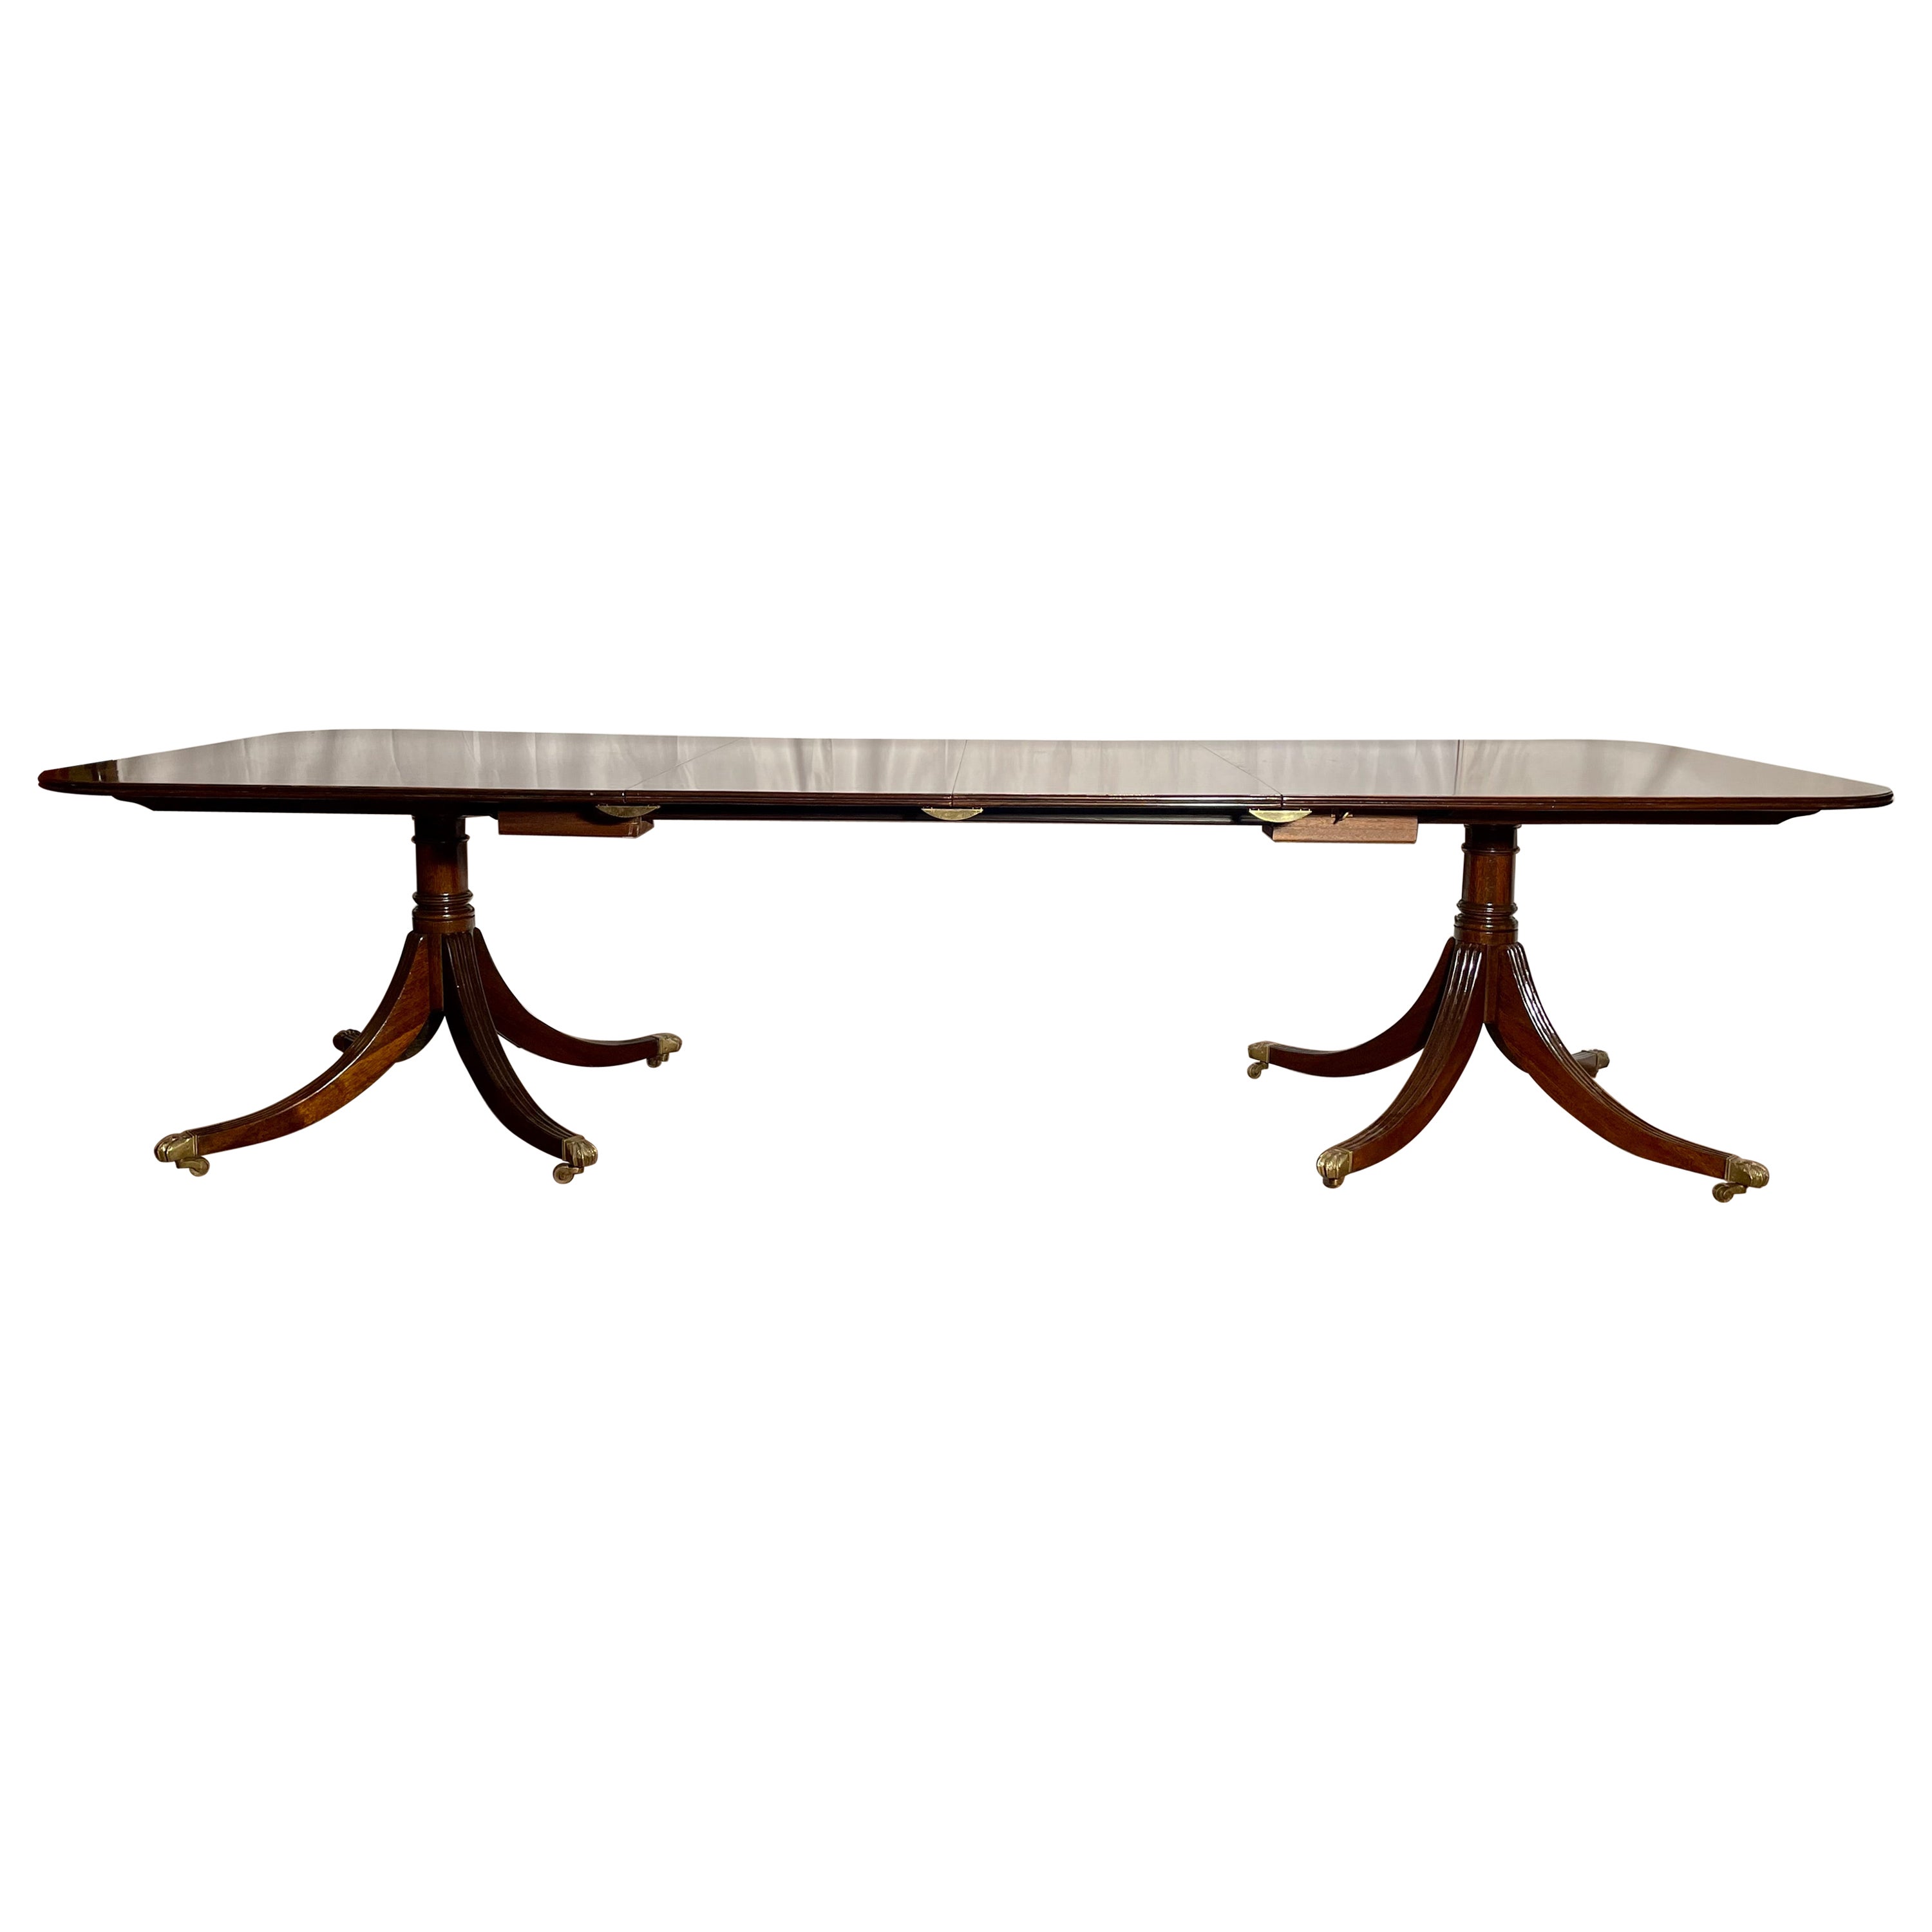 English Mahogany, Satinwood, & Rosewood Banded Dining Table, circa 1950s For Sale